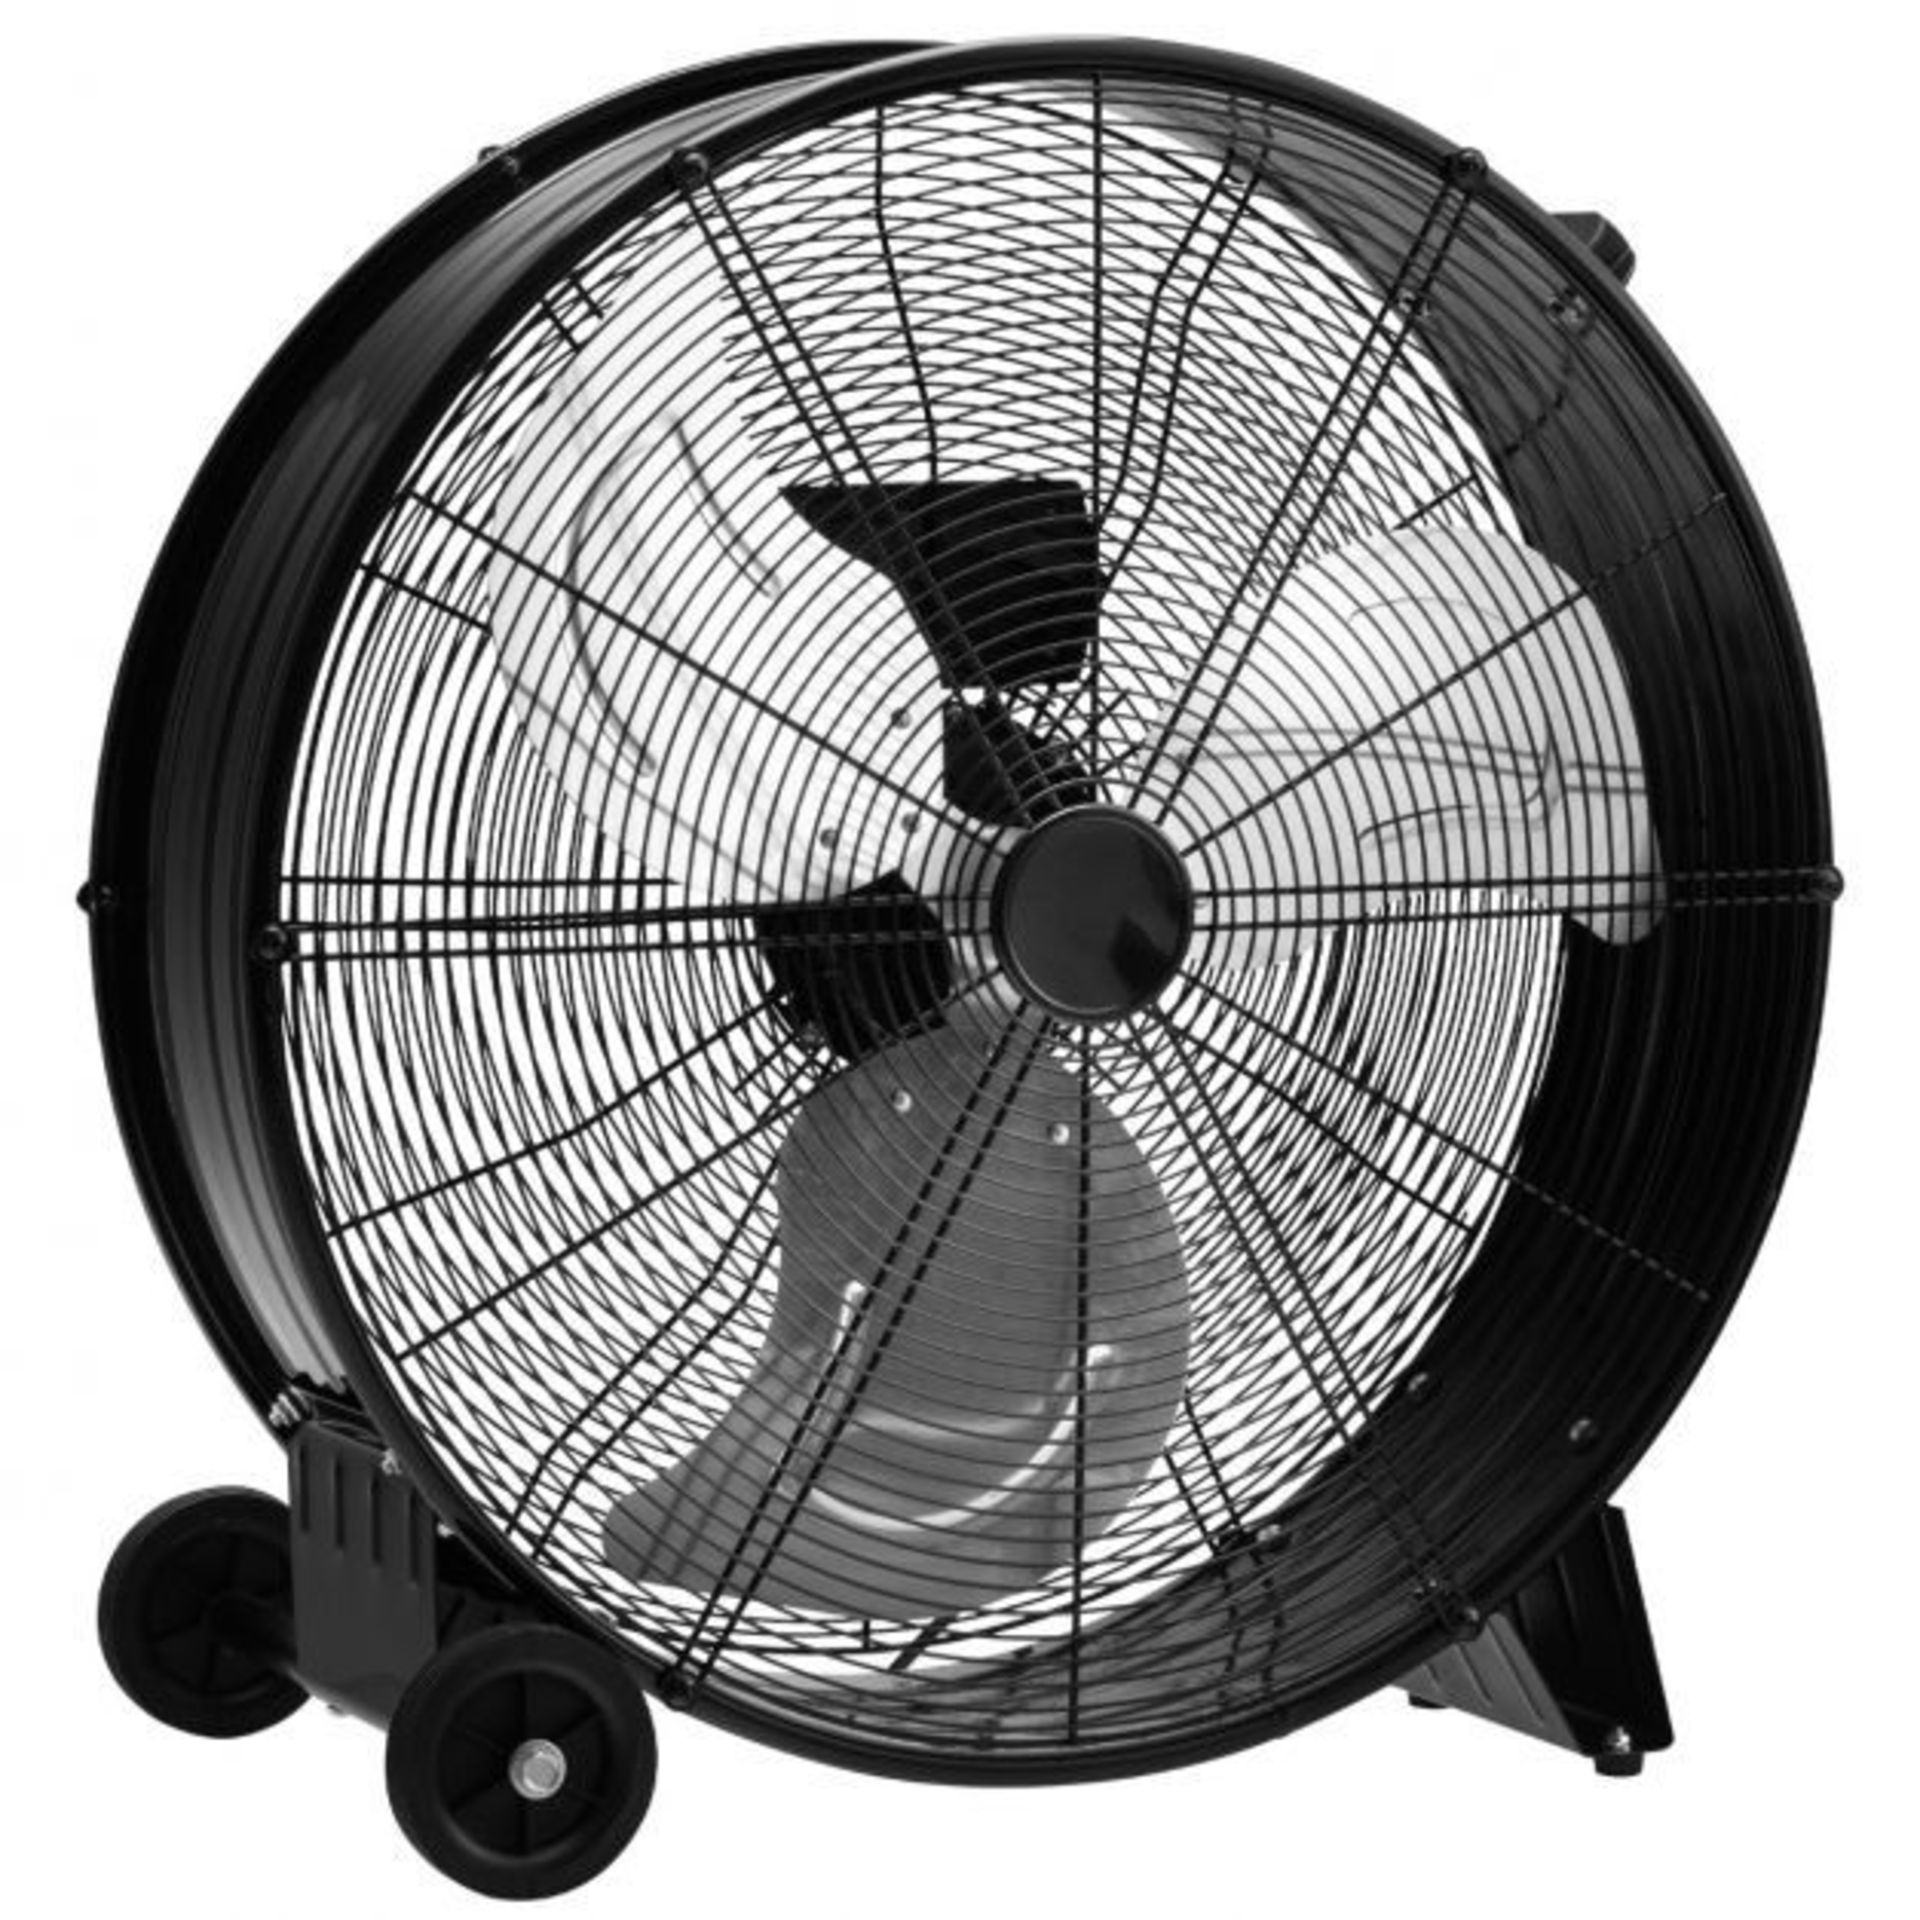 24 Inch High-Velocity Industrial Floor Fan with Wheels and Handle. - ER25. Gain enjoyable coolness